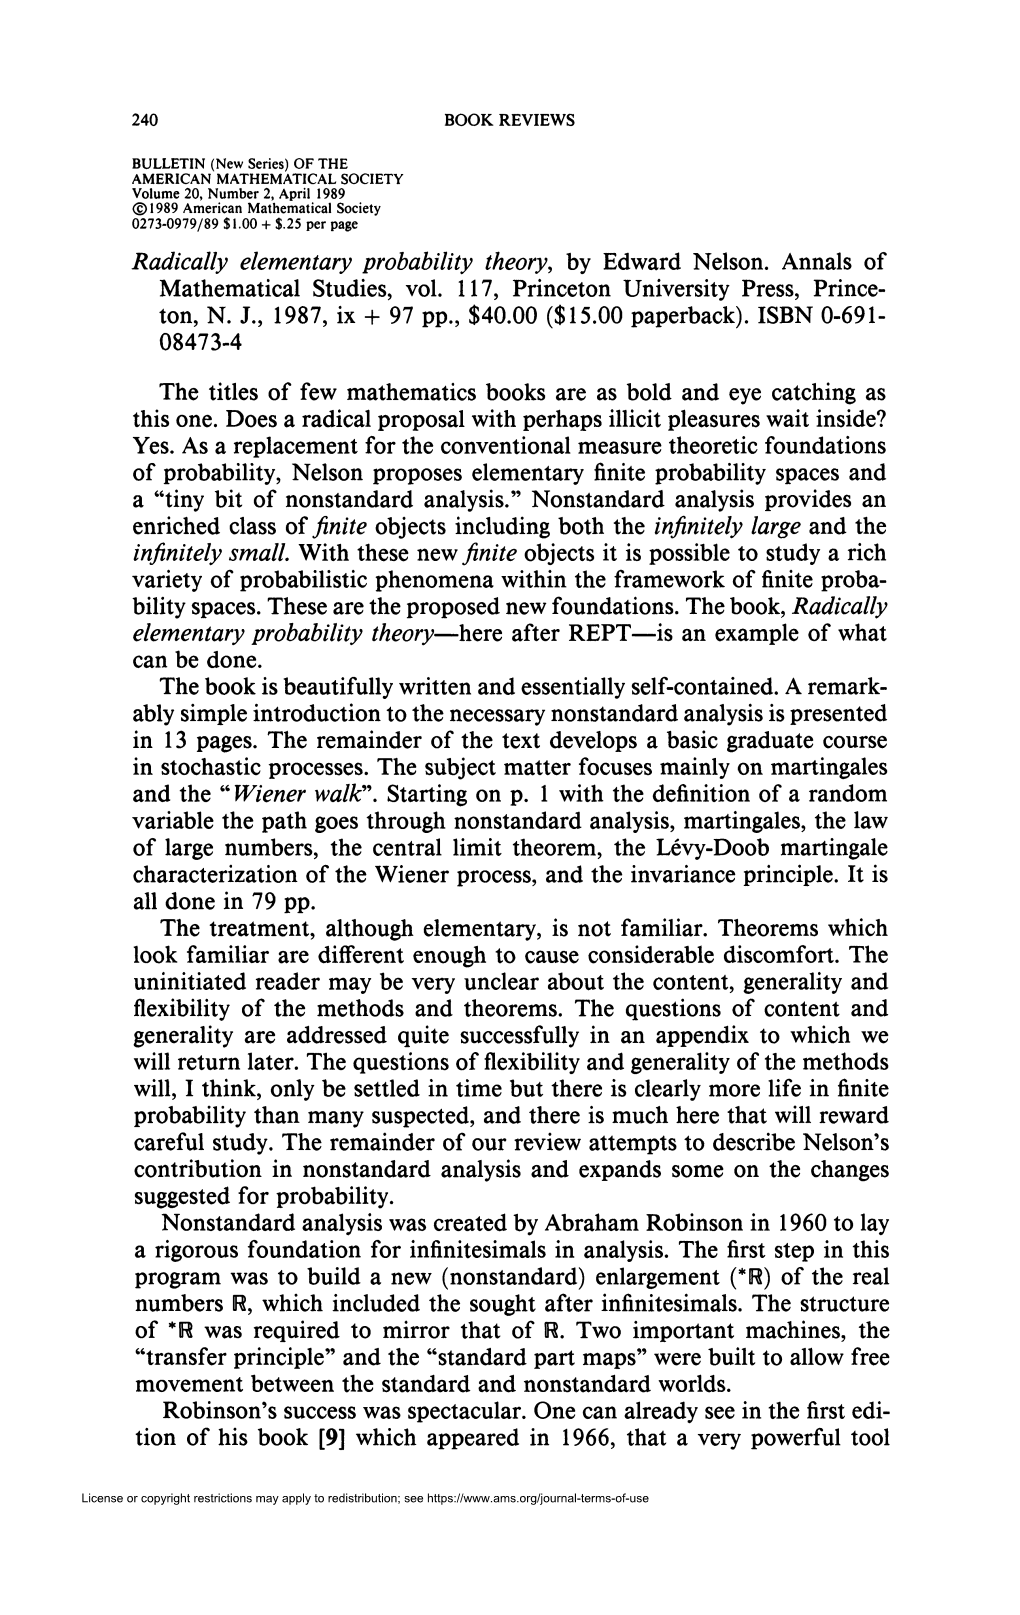 Radically Elementary Probability Theory, by Edward Nelson. Annals of Mathematical Studies, Vol